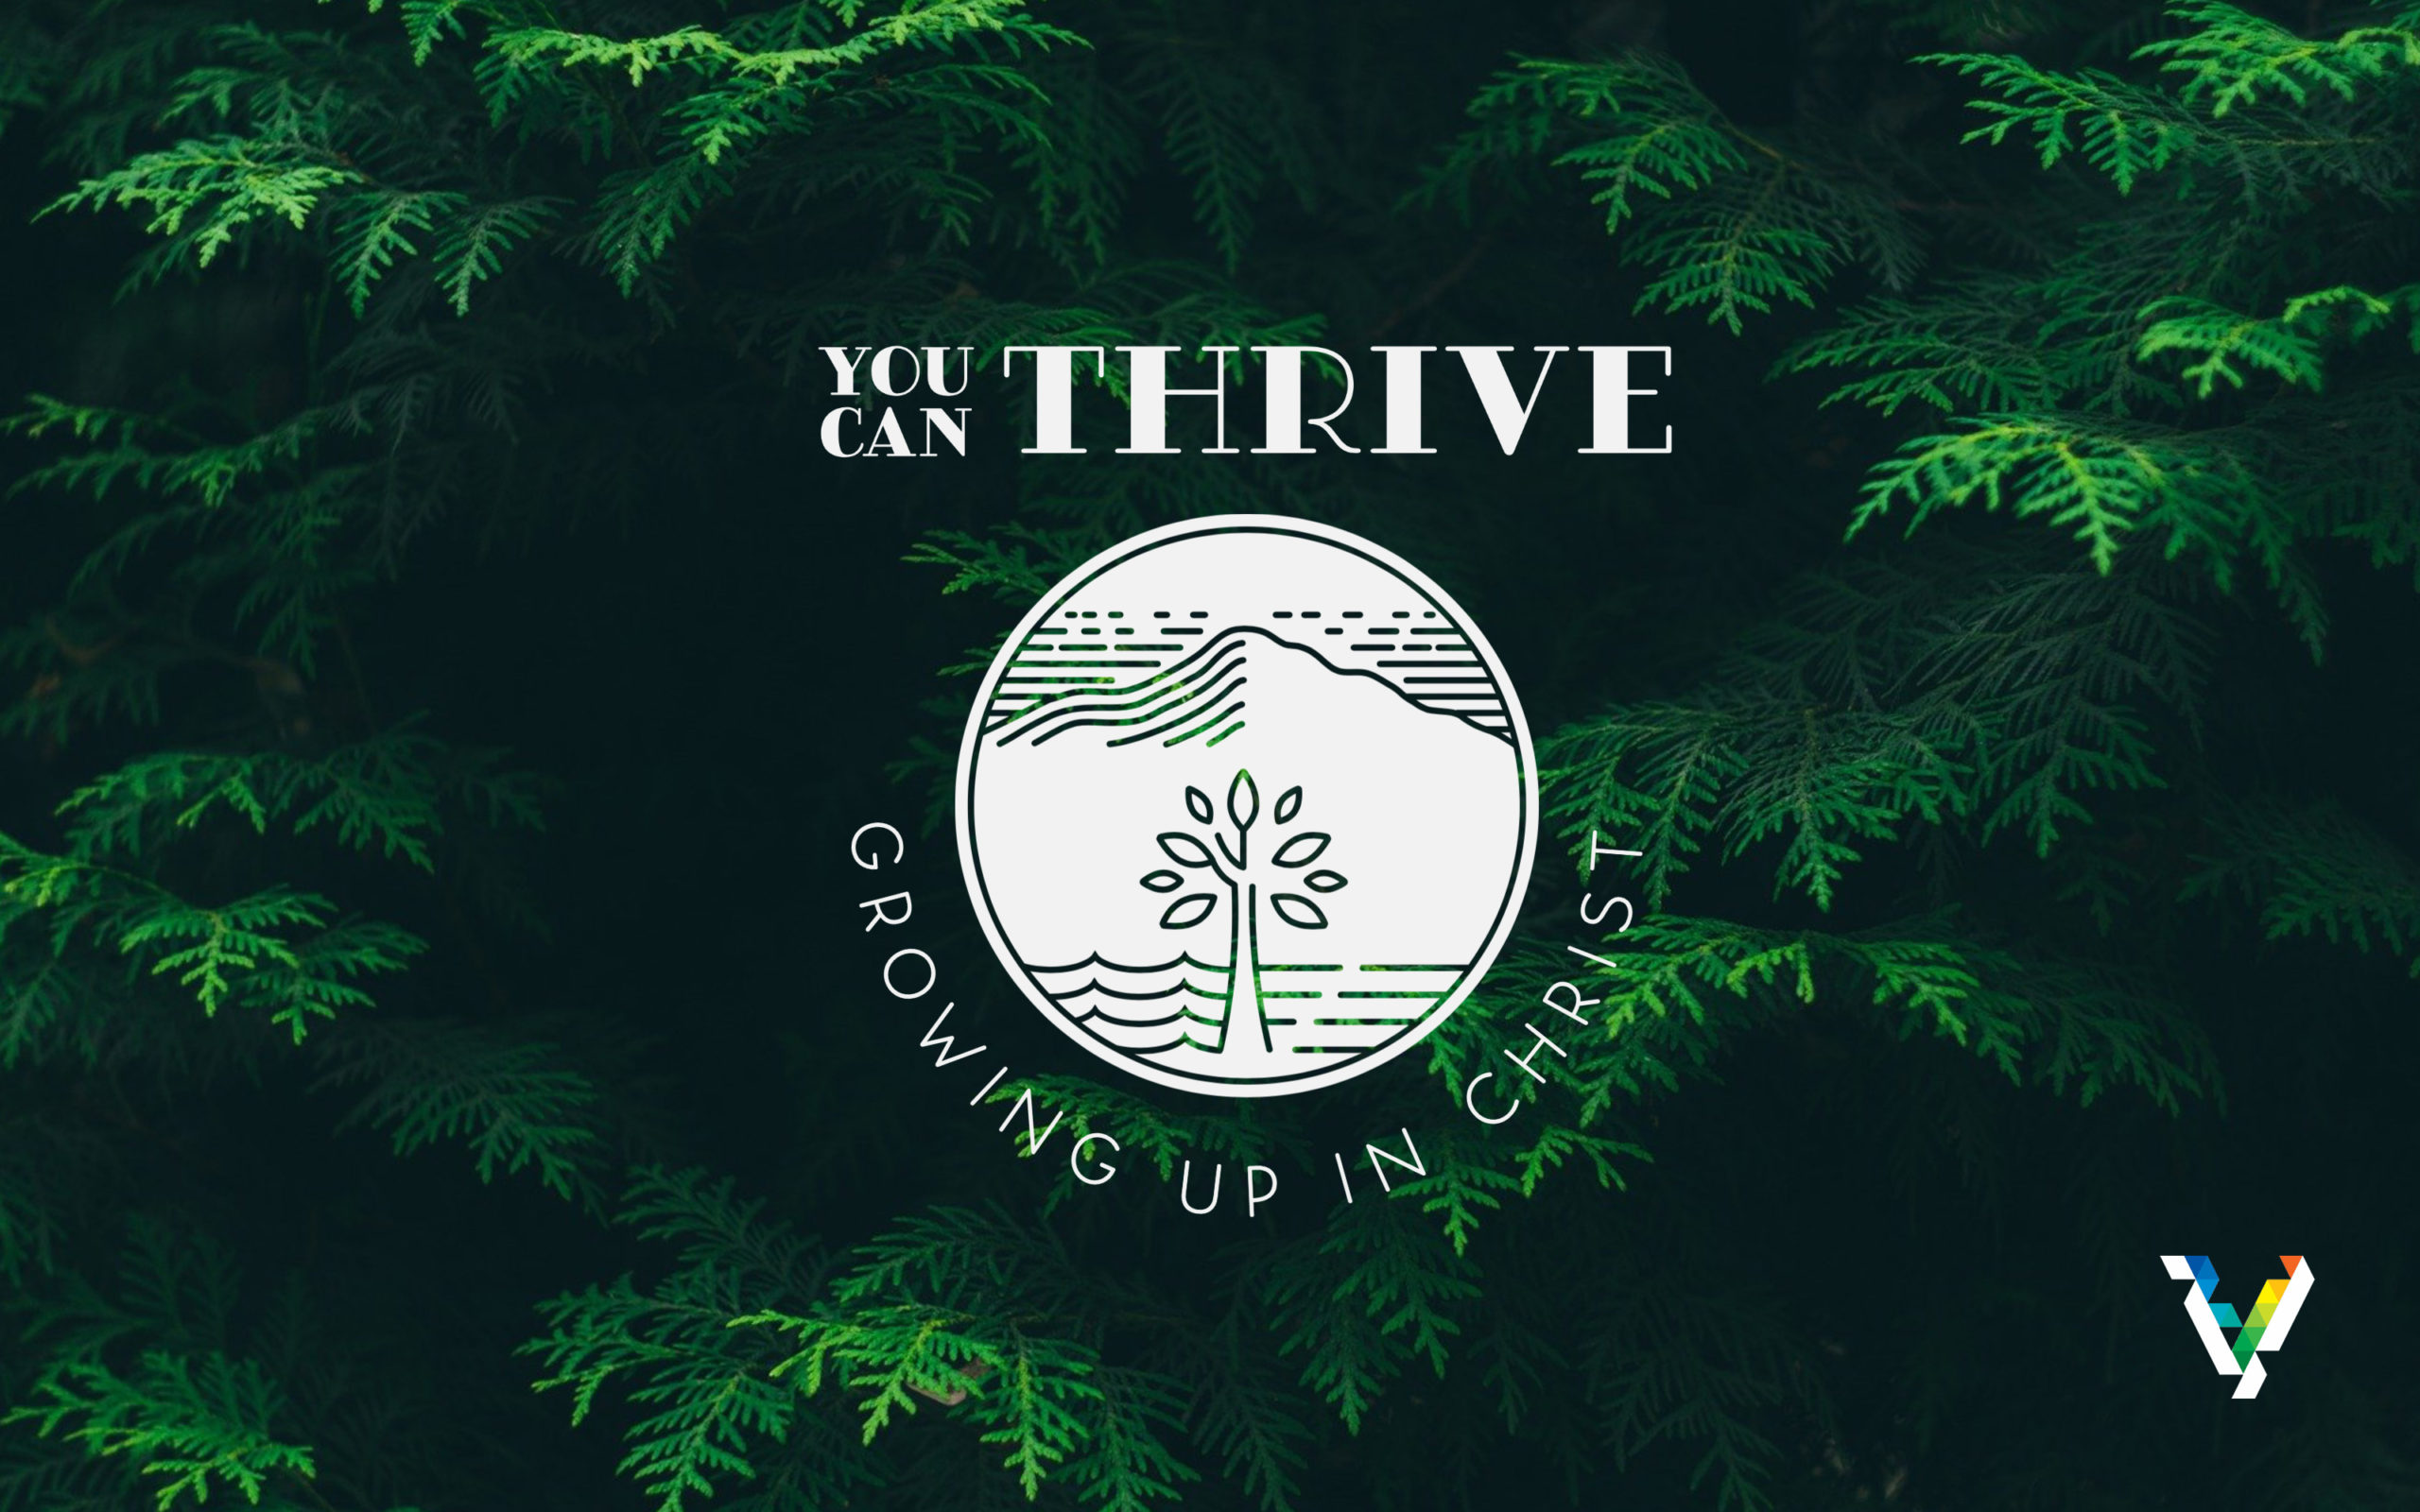 You Can Thrive: Growing Up in Christ (Studies 1-5)